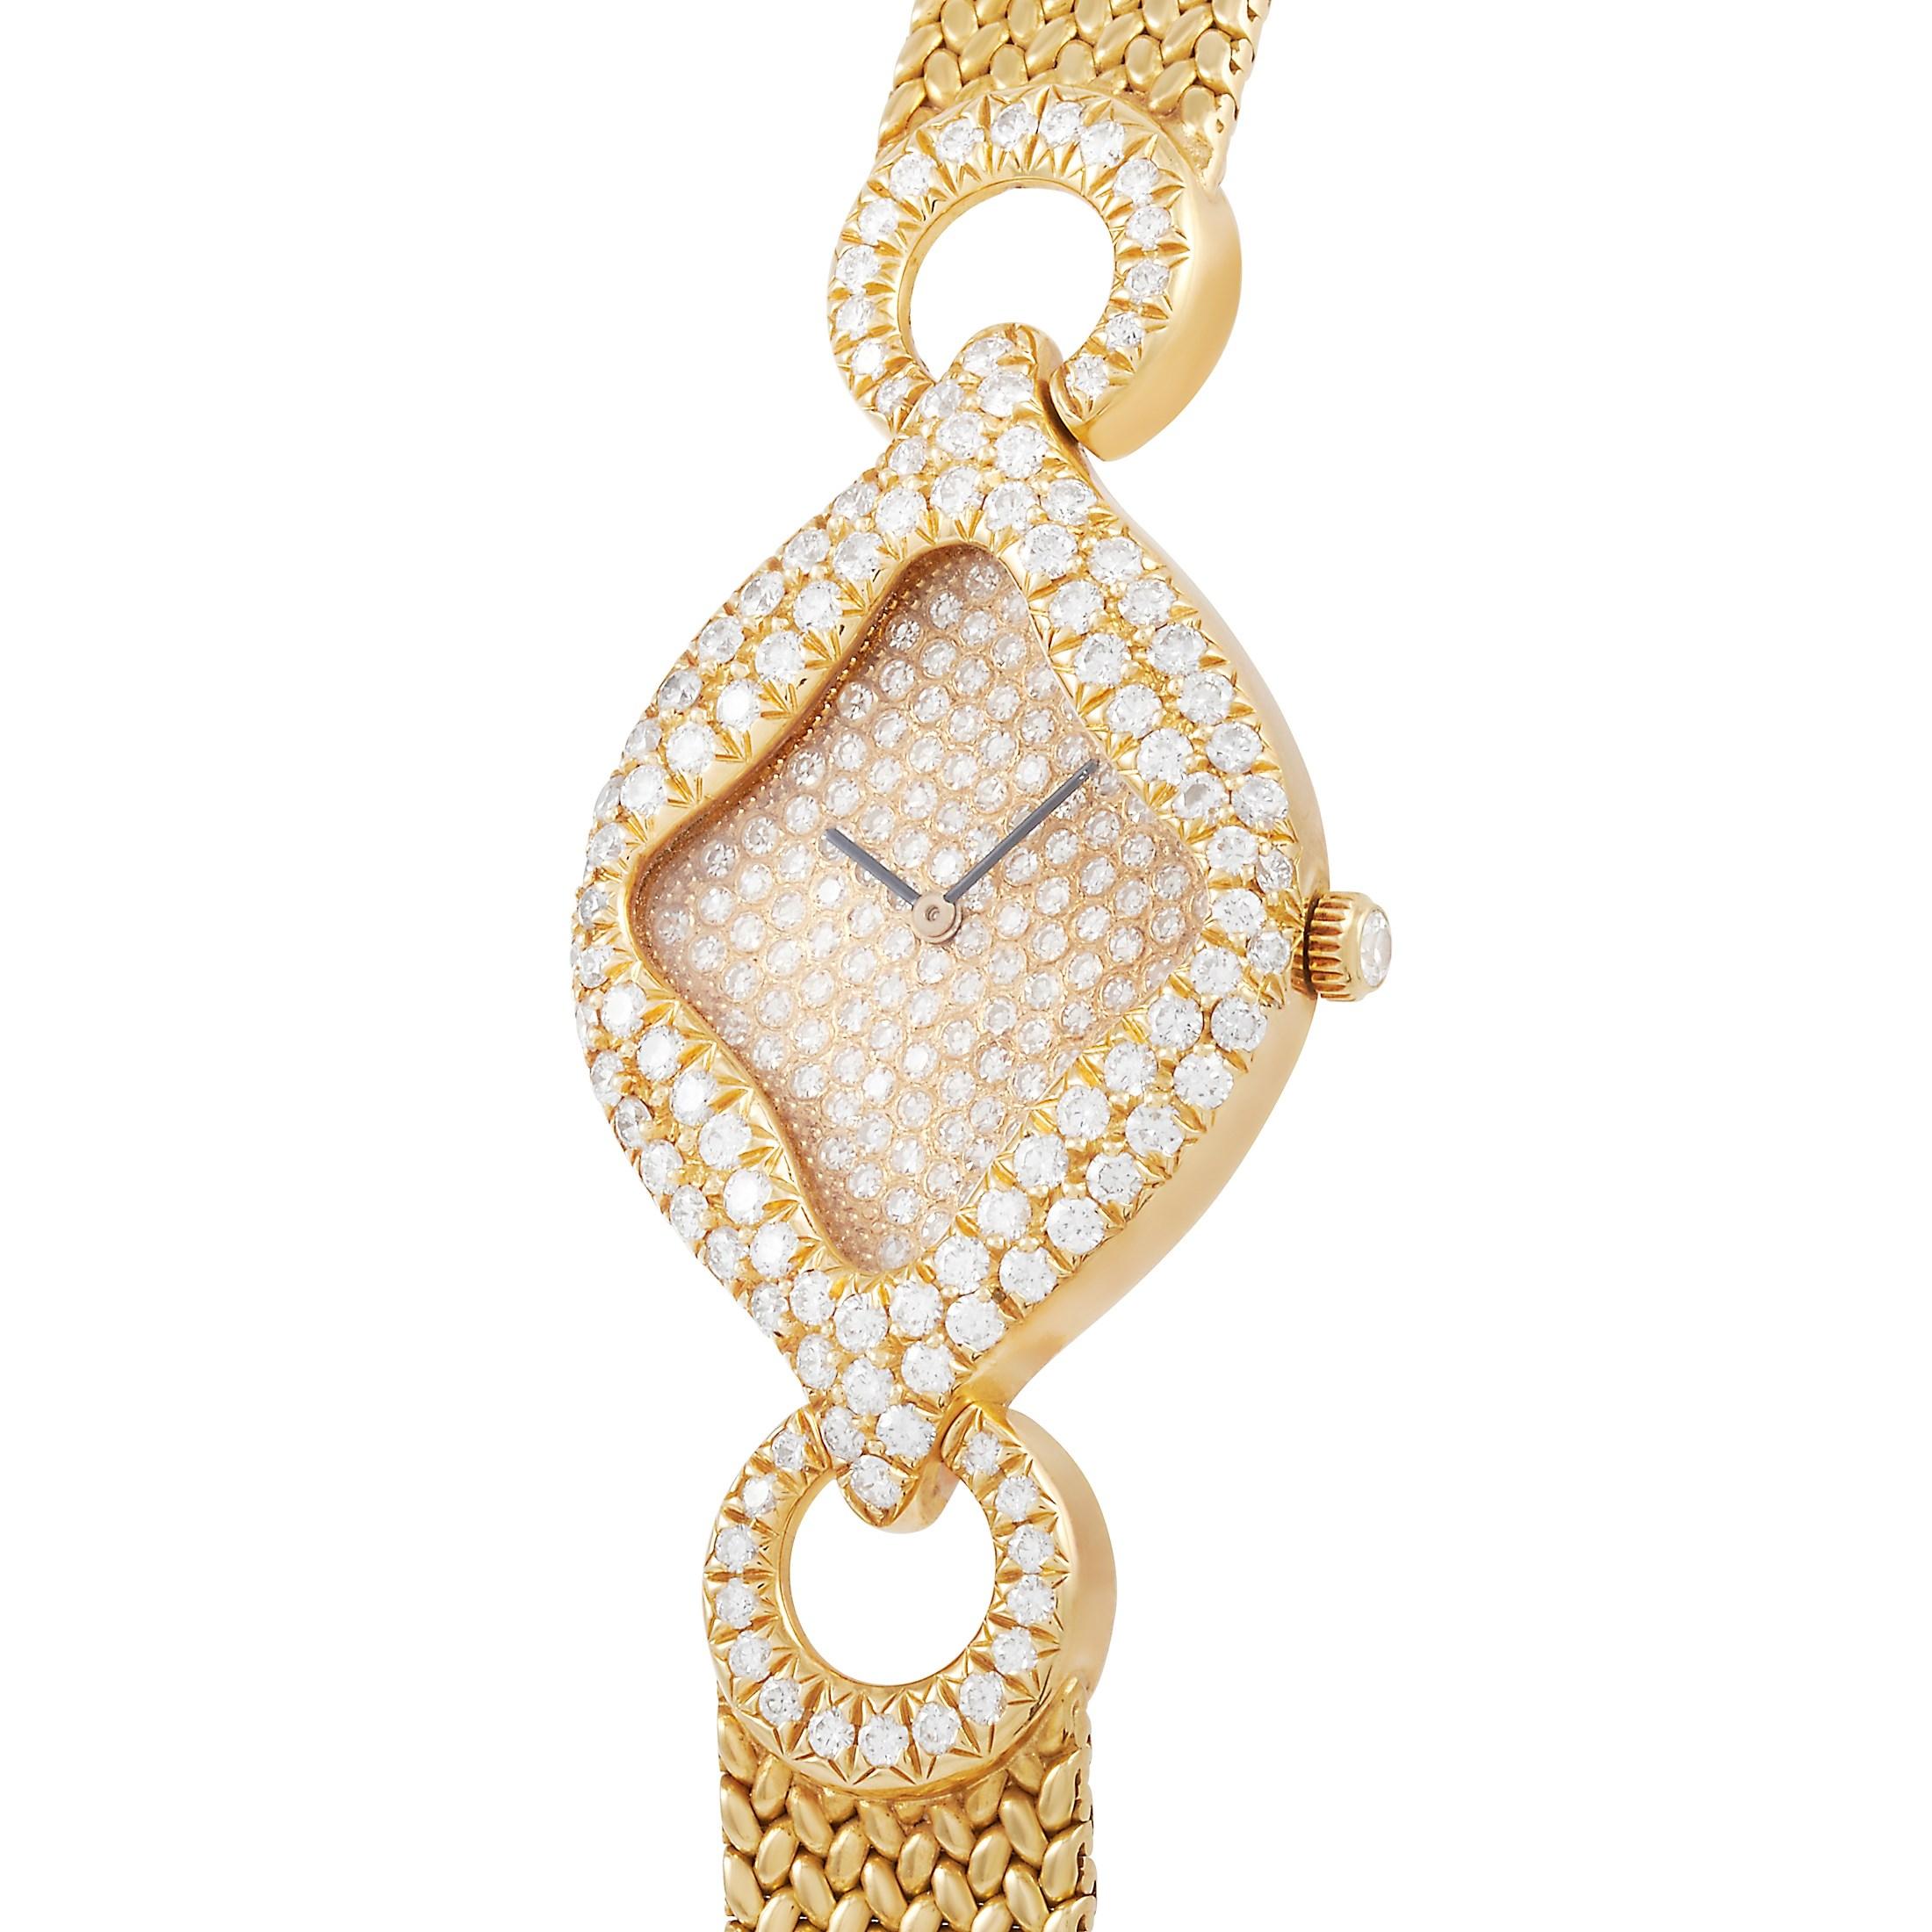 This is a very special watch that was made for the Sultan of Oman by Gerald Genta and Royama. The unique piece is presented in 18K yellow gold, and features a two row diamond bezel in a distinctive diamond shape case. The case is presented on a